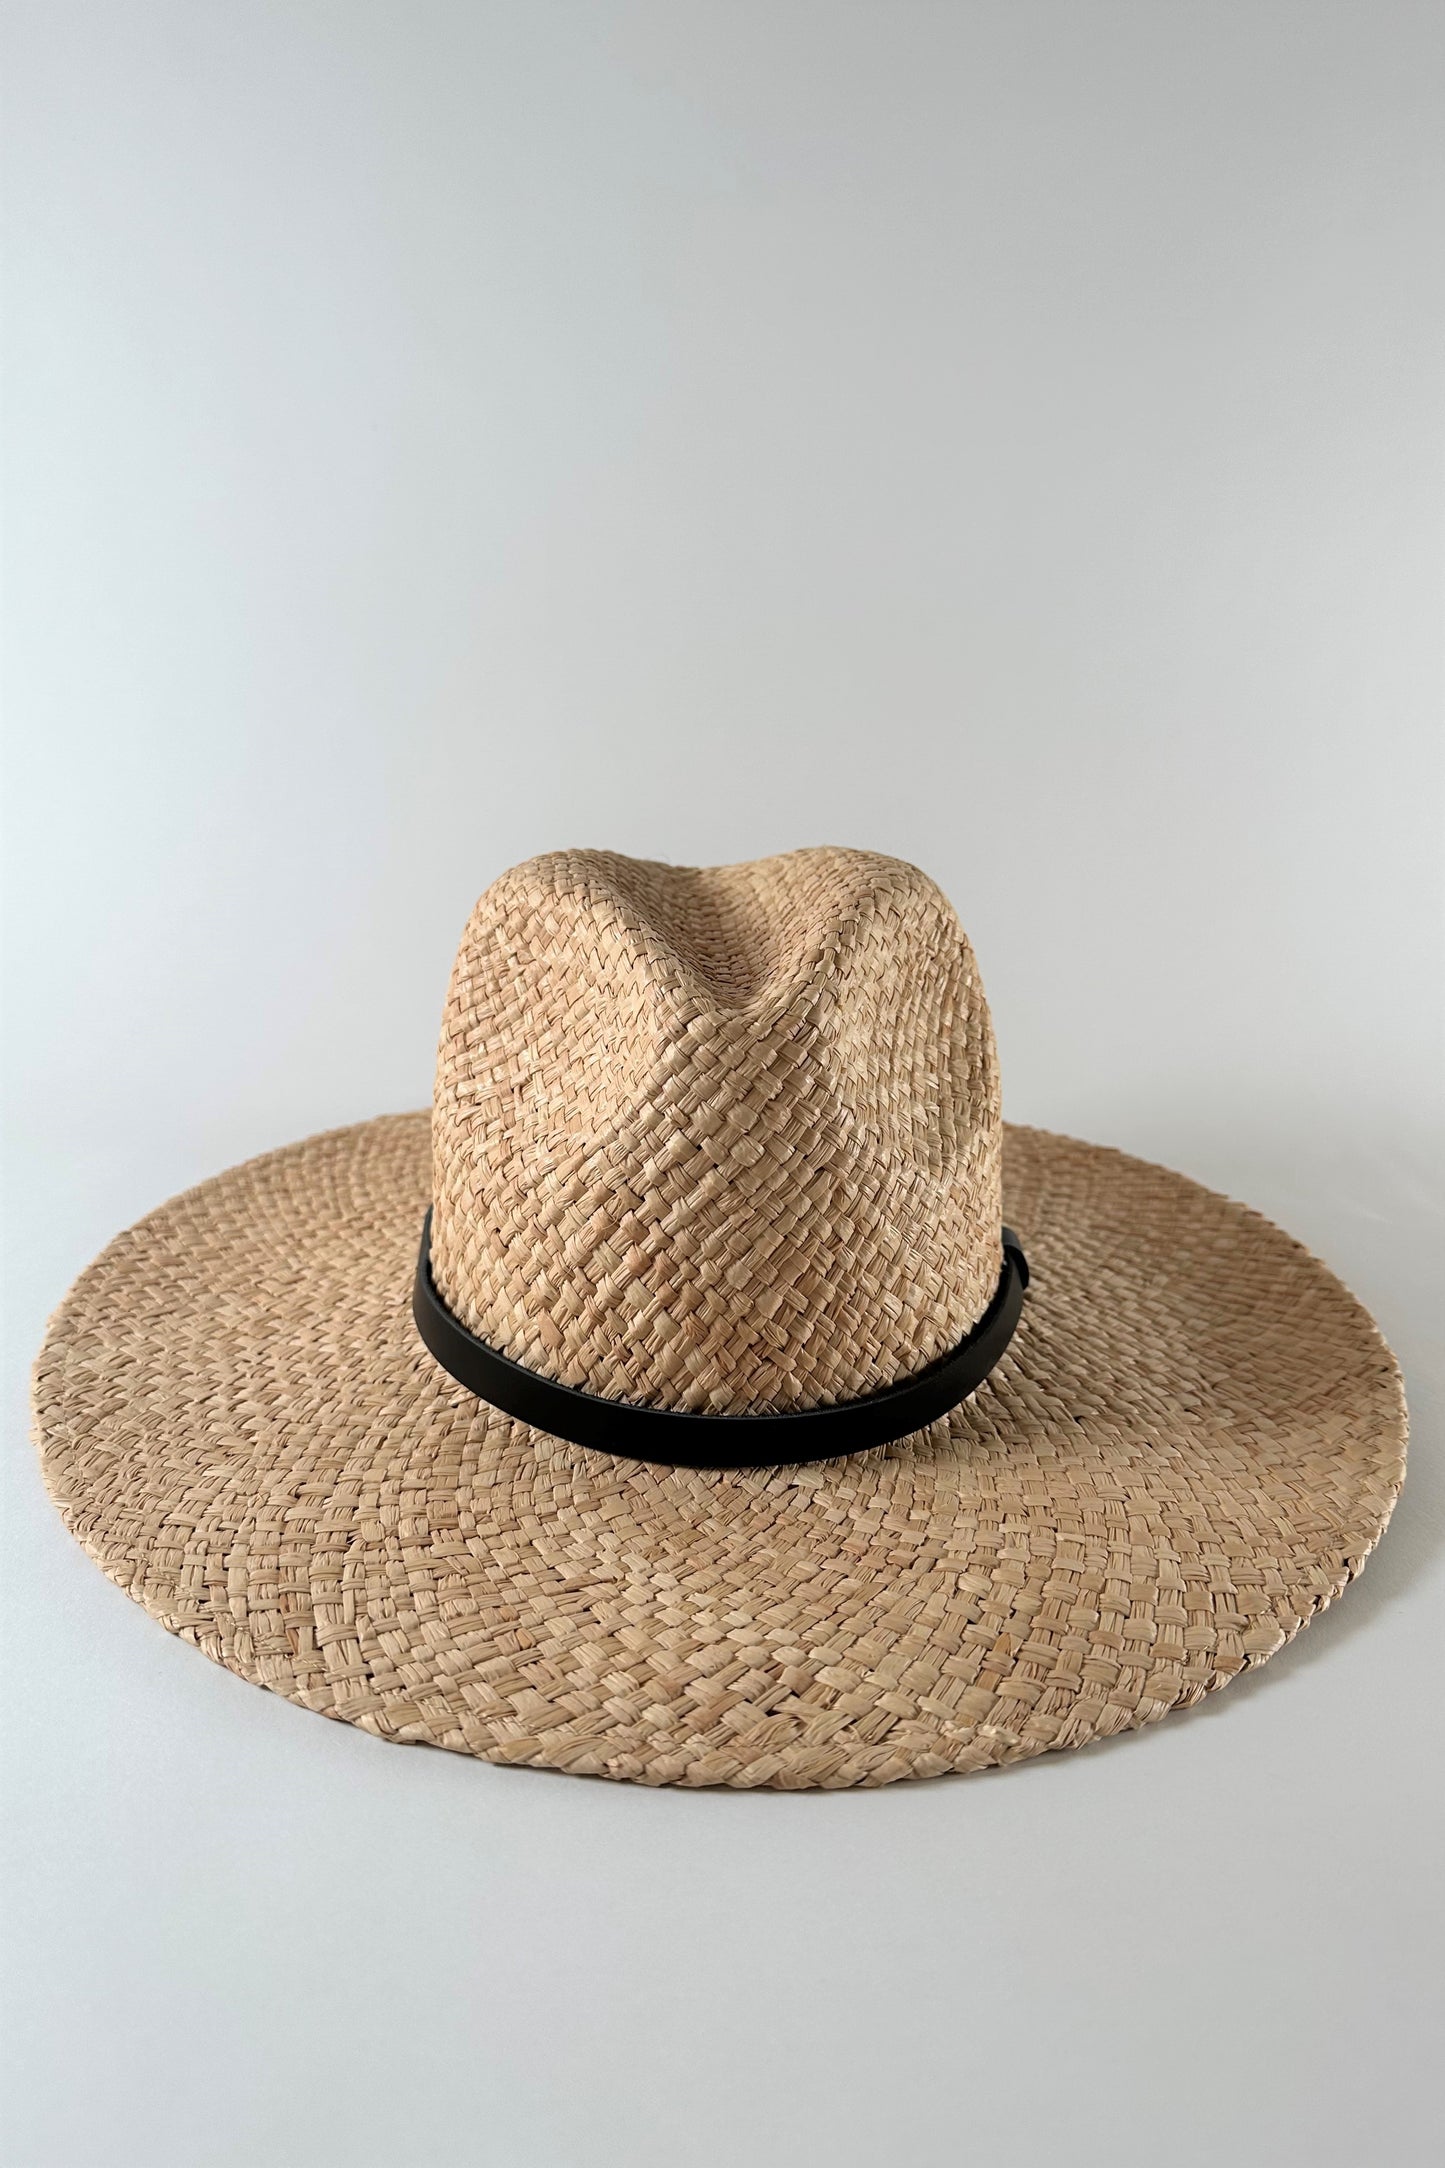 Straw panama hat with a black leather ba